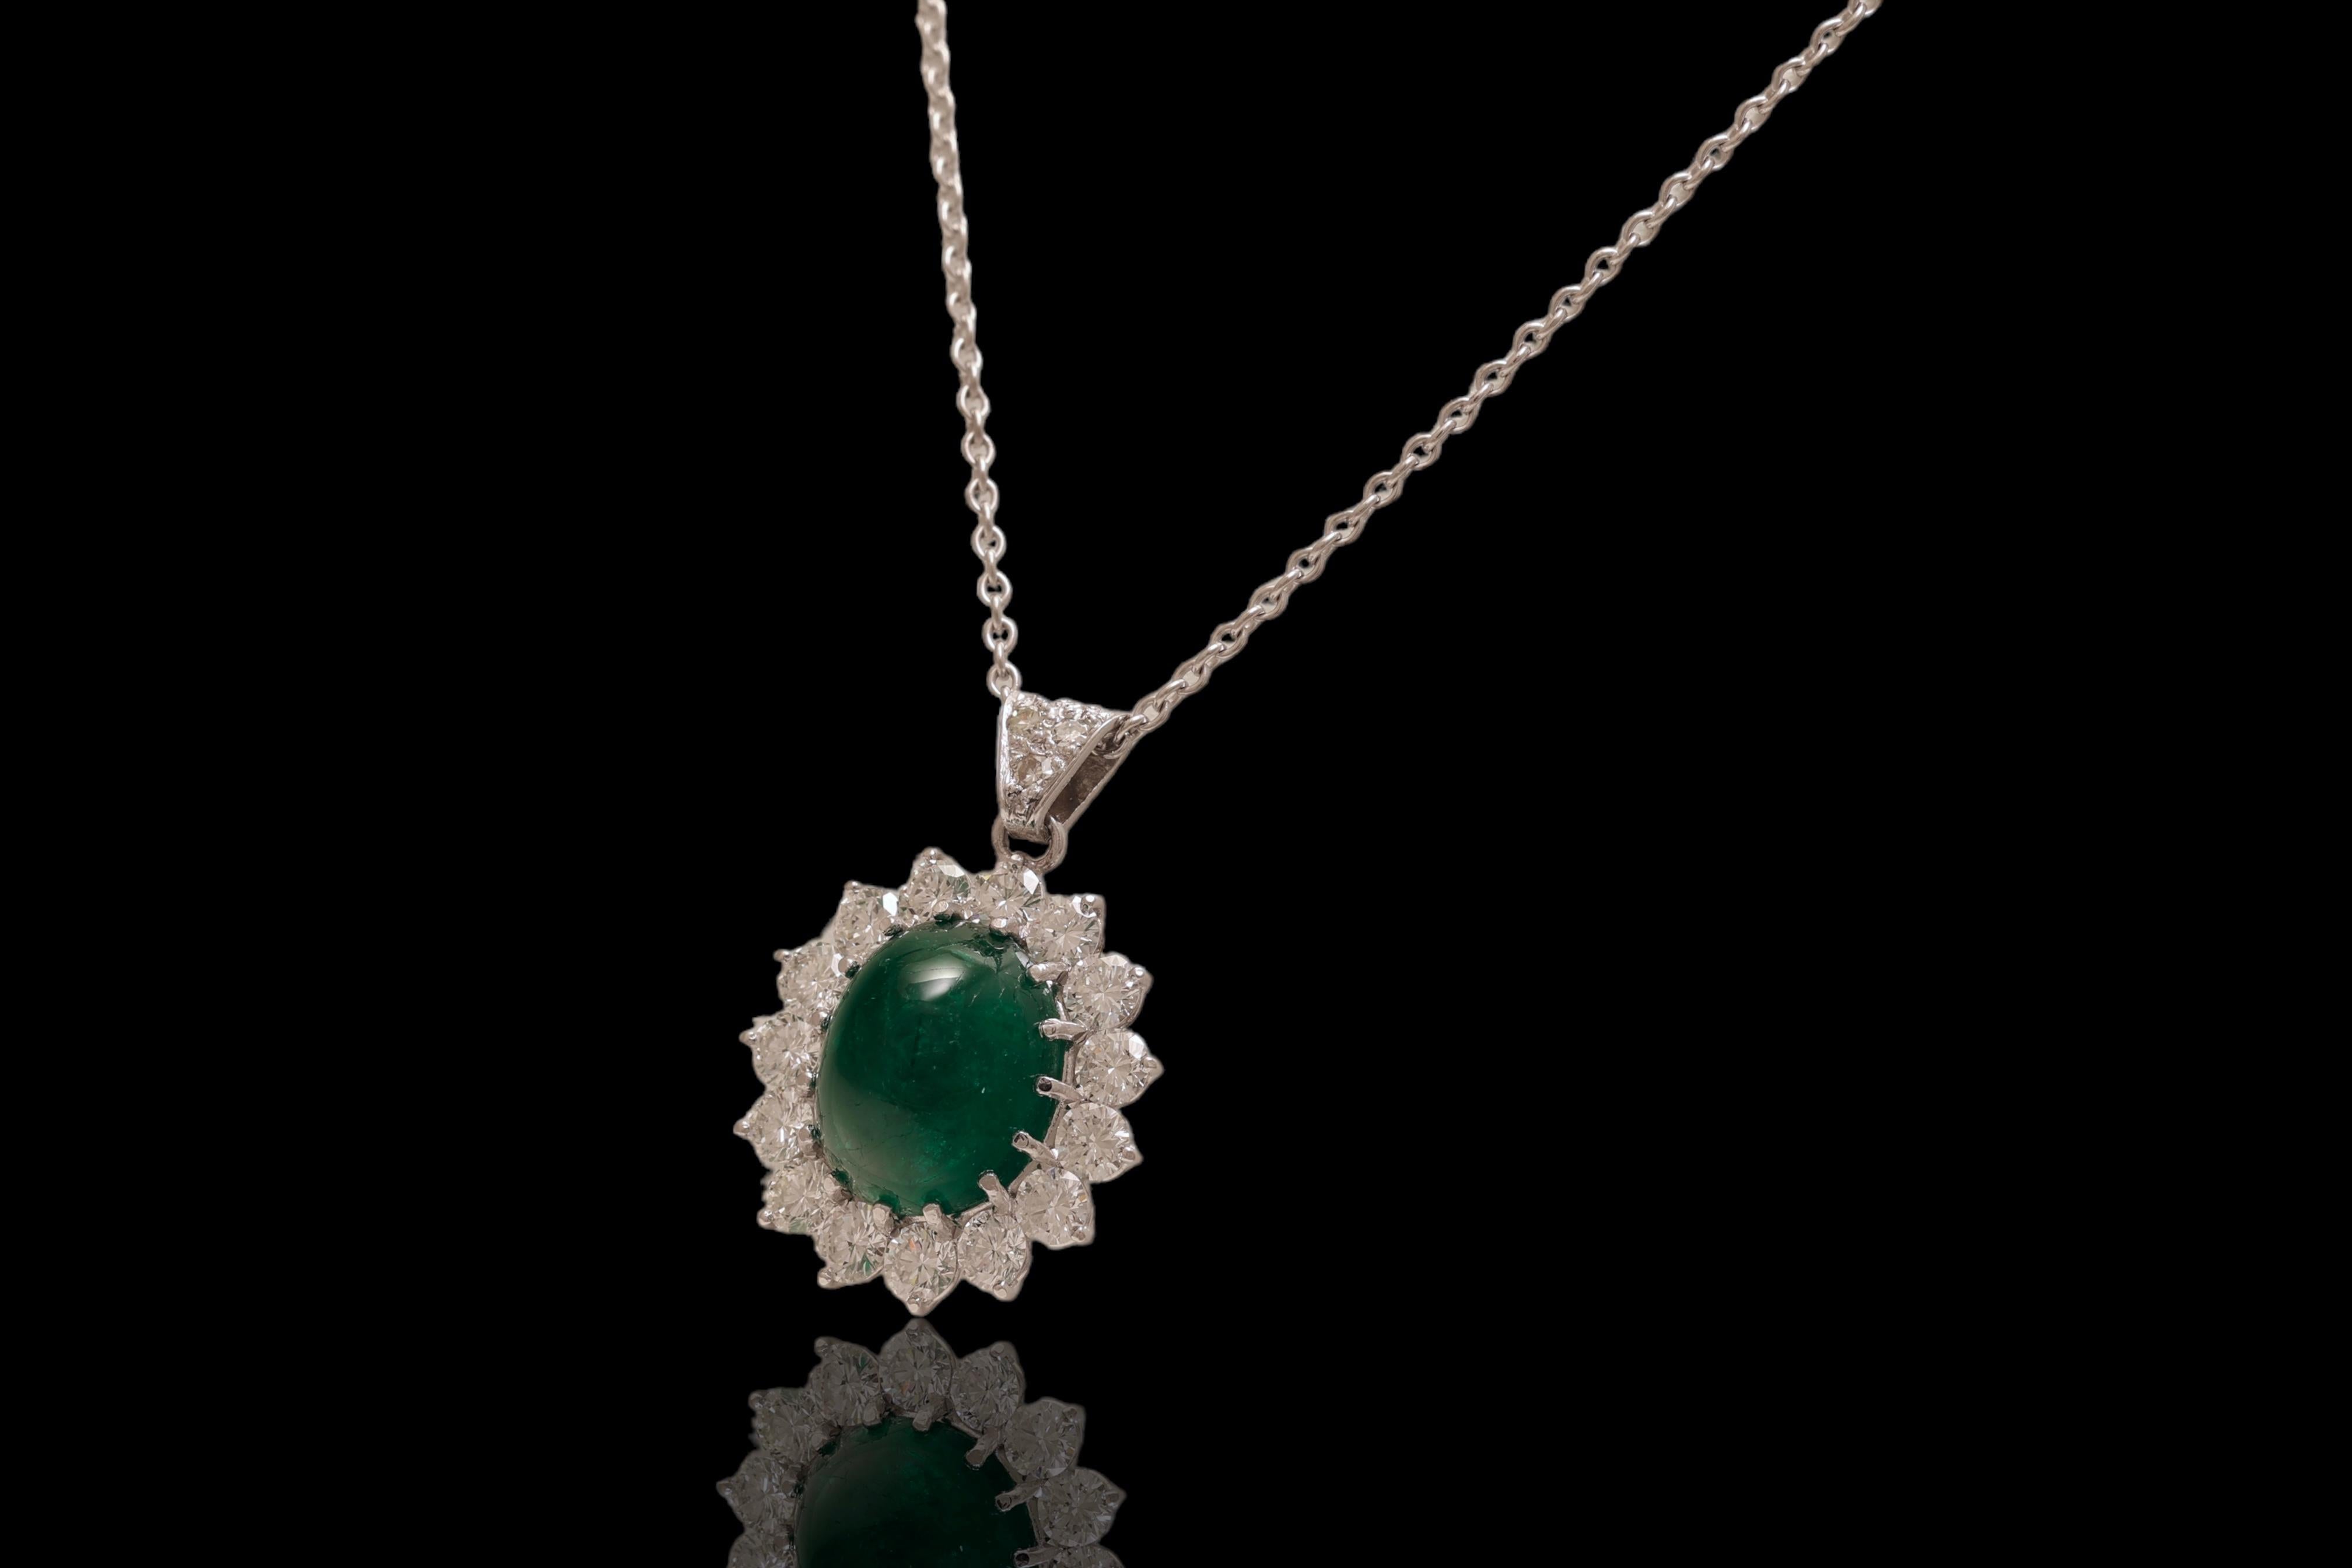 Gorgeous platinum necklace with a 7.98 ct natural green emerald surrounded by 3.84 ct diamonds

Gemstone :
One polished Natural Green Emerald 
Weight : 7.98 carat
Dimensions: 13.13 x 10.86 x 8.65 mm
Cut : Cabochon 
Shape : oval

Diamonds : 3.84 ct